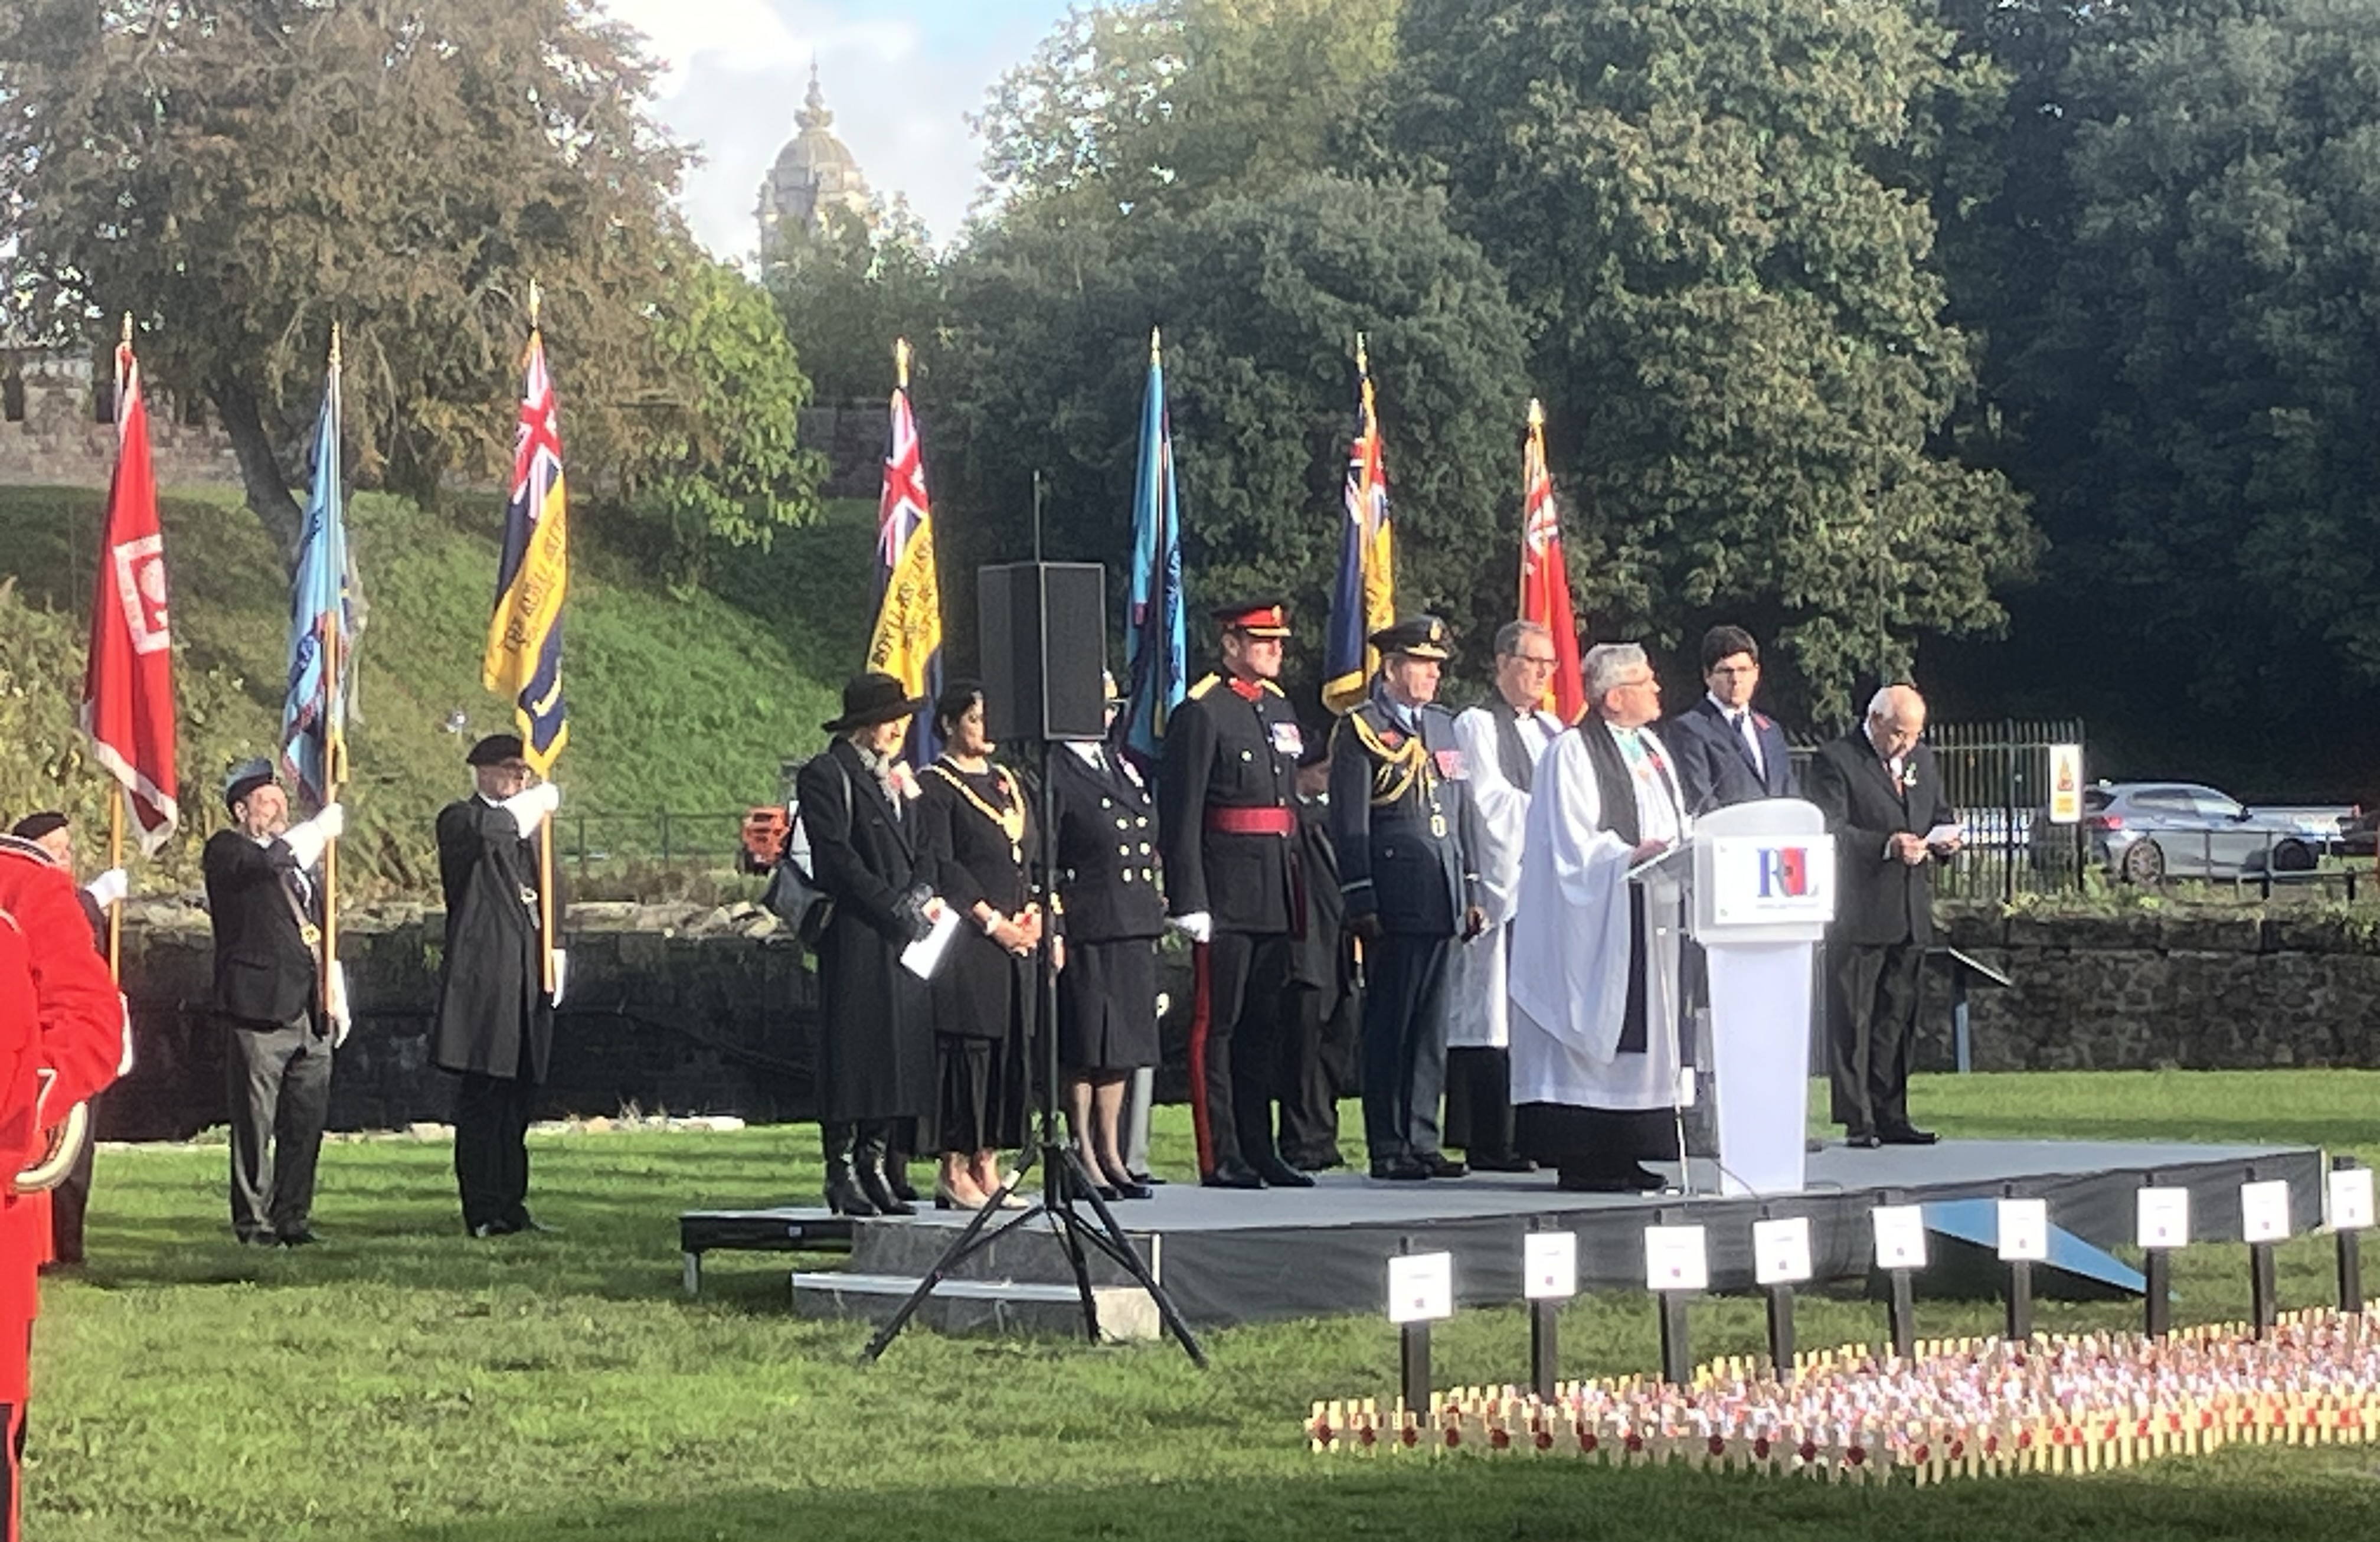 THE FRONT ROW
LORD LIEUTENANT, LORD MAYOR,
ROYAL NAVY, ARMY AND ROYAL AIR FORCE
FIRST MINISTER, LEADER OF CARDIFF CC, AND TRBL.
BUT NO FOURTH SERVICE (MERCHANT NAVY)